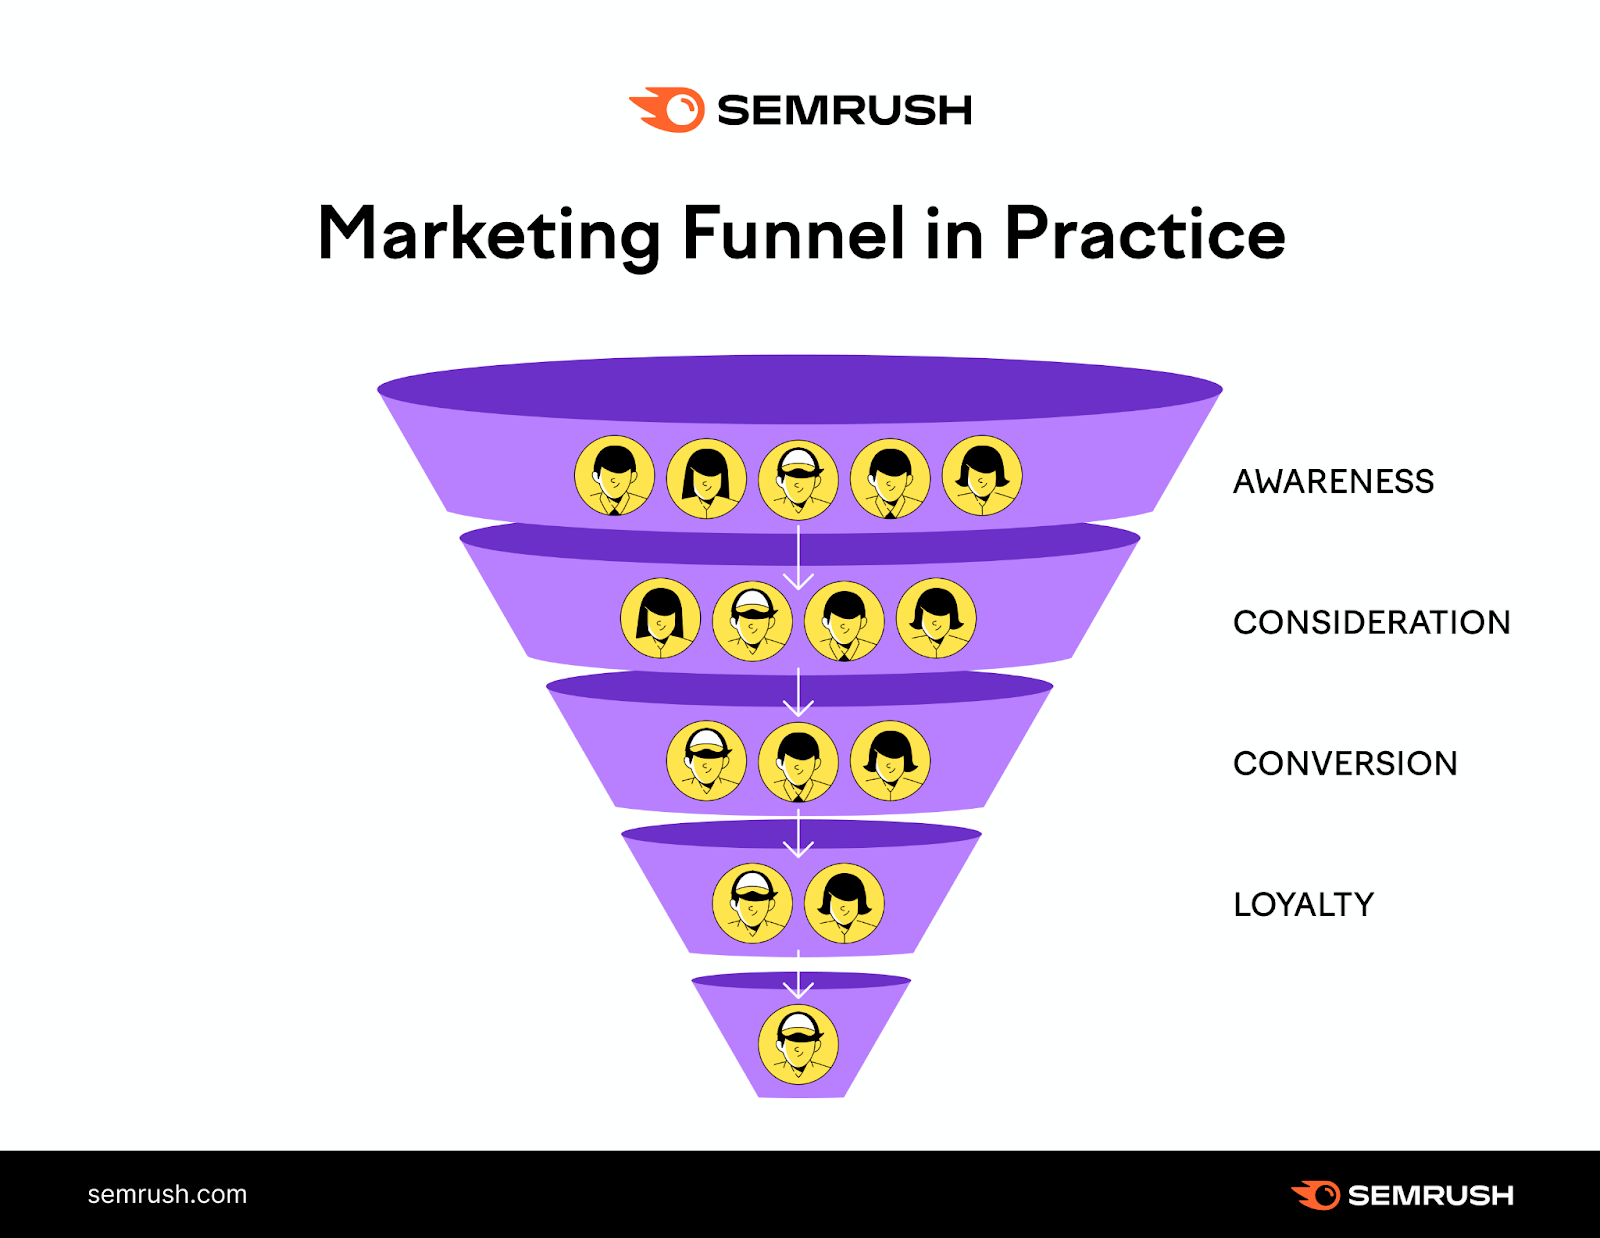 Marketing funnel that shows people dropping out at each stage